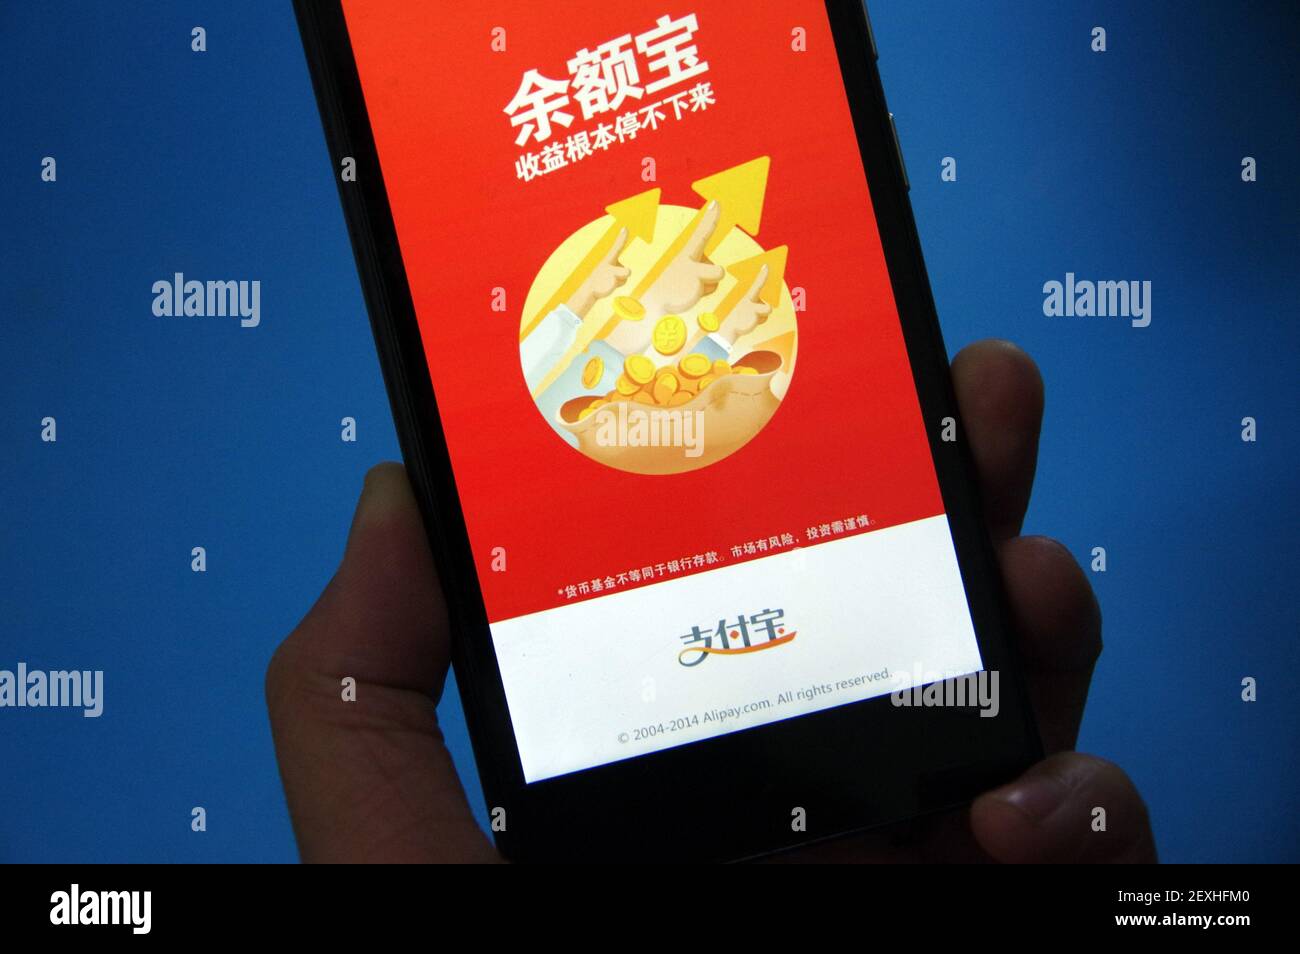 FILE--A man uses YuEbao, the fund management platform under Alipay of  Alibaba Group, on his smartphone in Ji'nan city, east China's Shandong  province, 5 November 2014. Yuebao, China's largest money market fund